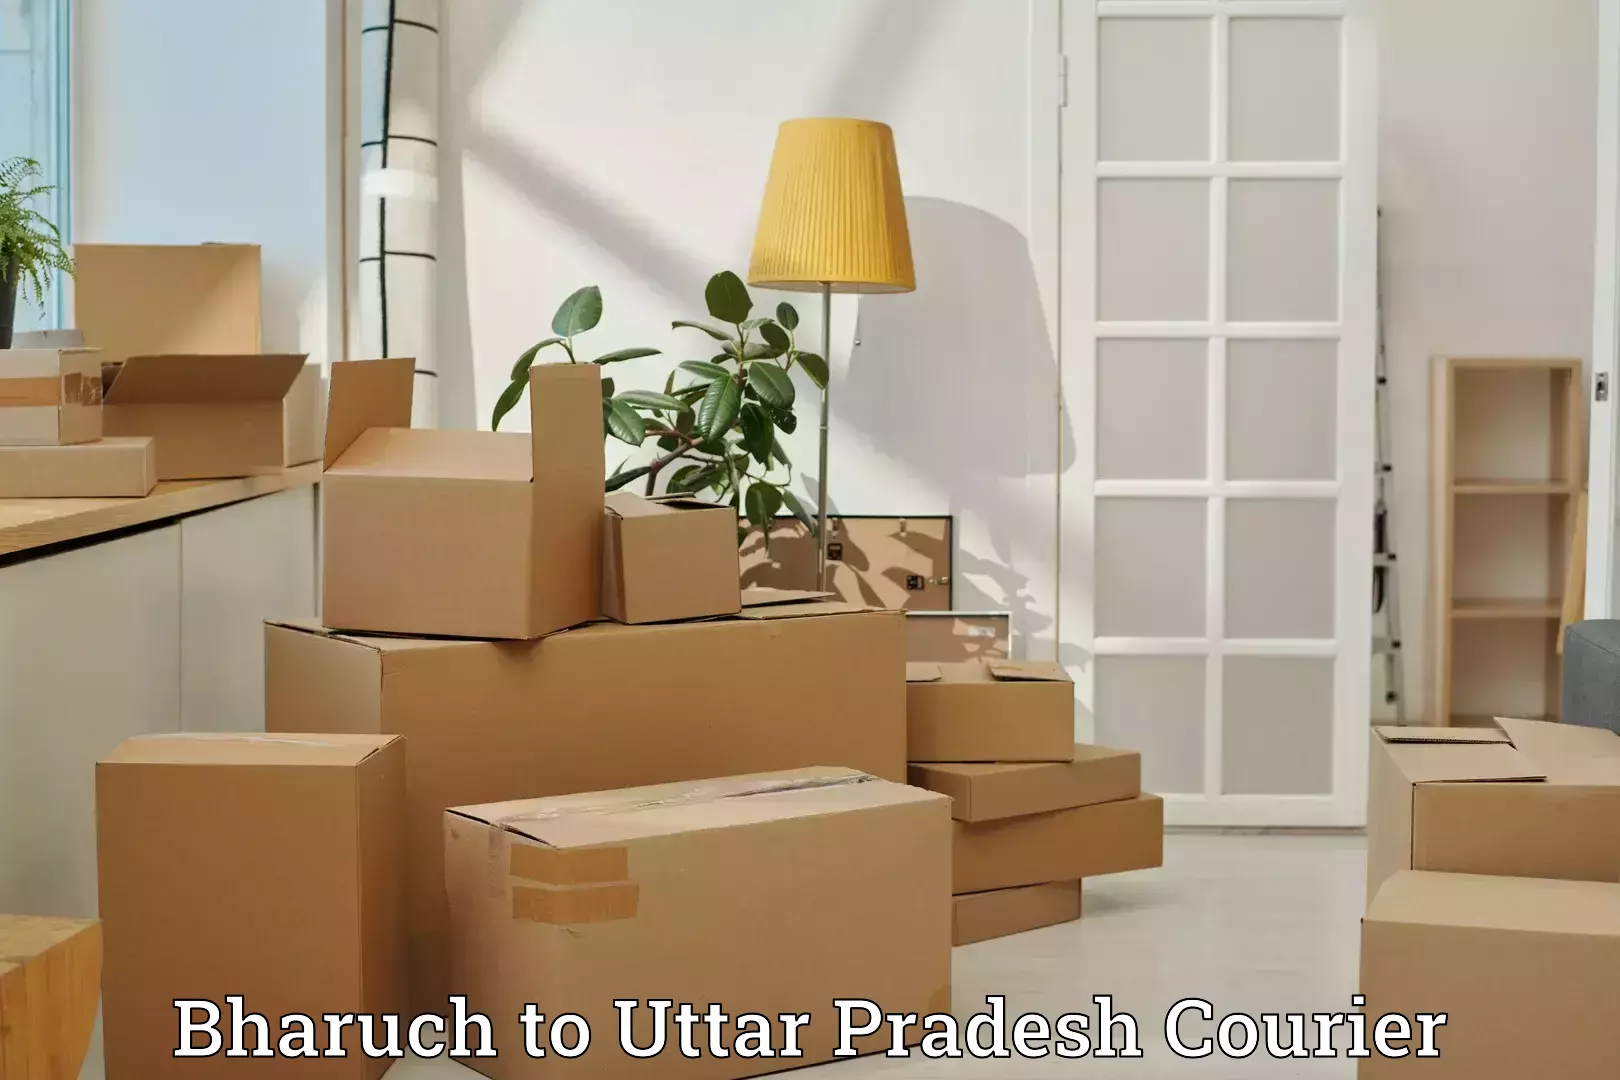 Online luggage shipping Bharuch to Kanpur